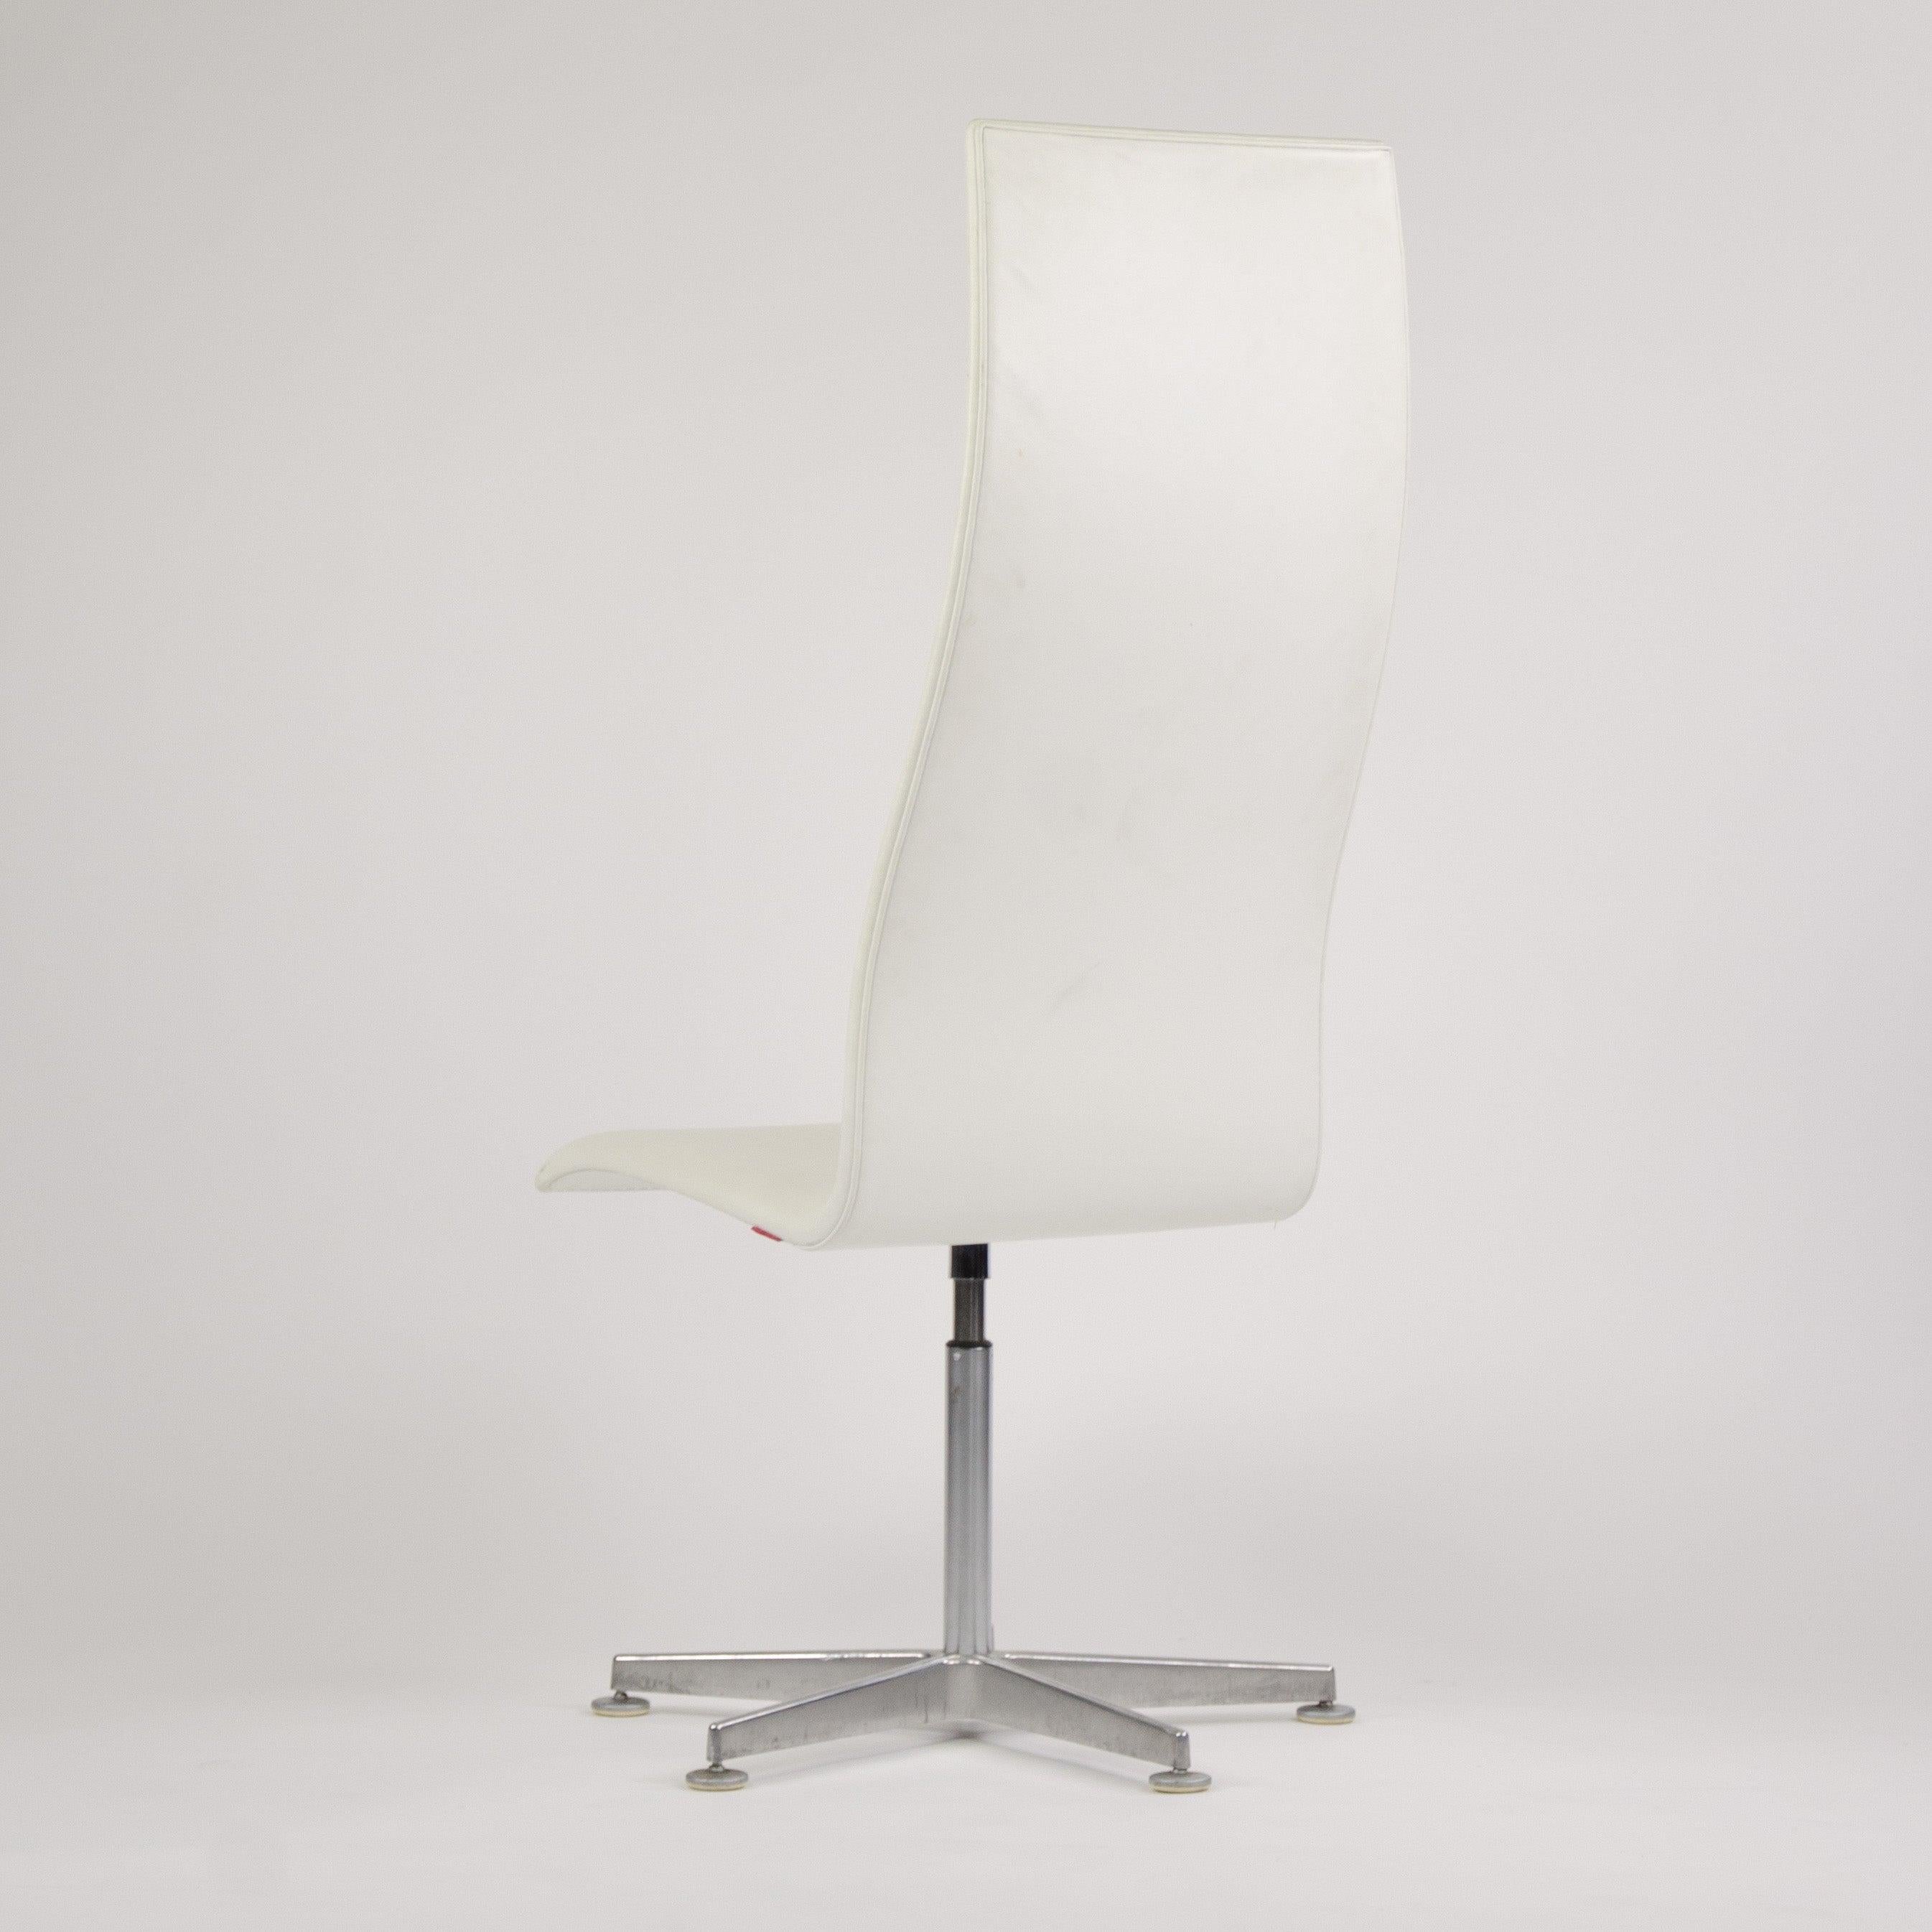 Contemporary Fritz Hansen Arne Jacobsen Tall Oxford Chair White Leather 2007 4x Available For Sale